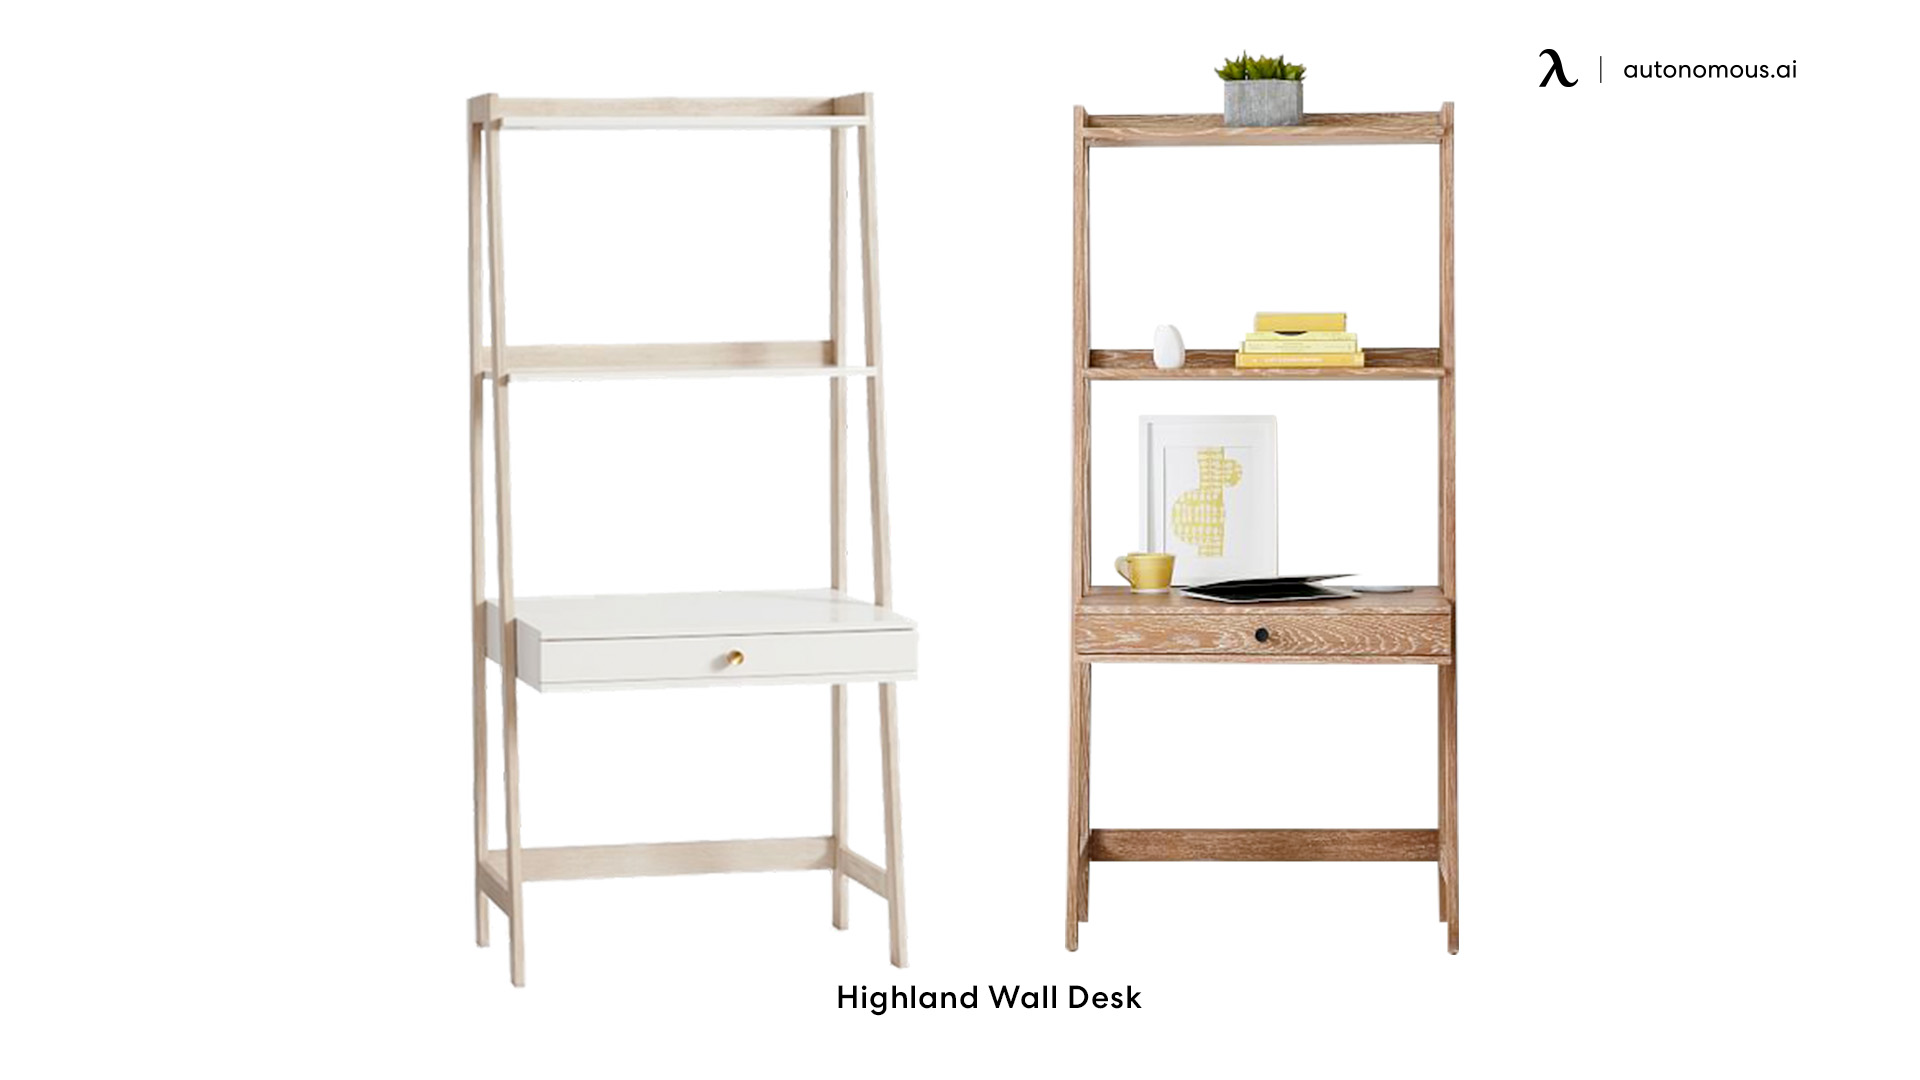 Highland Wall Desk small desk space